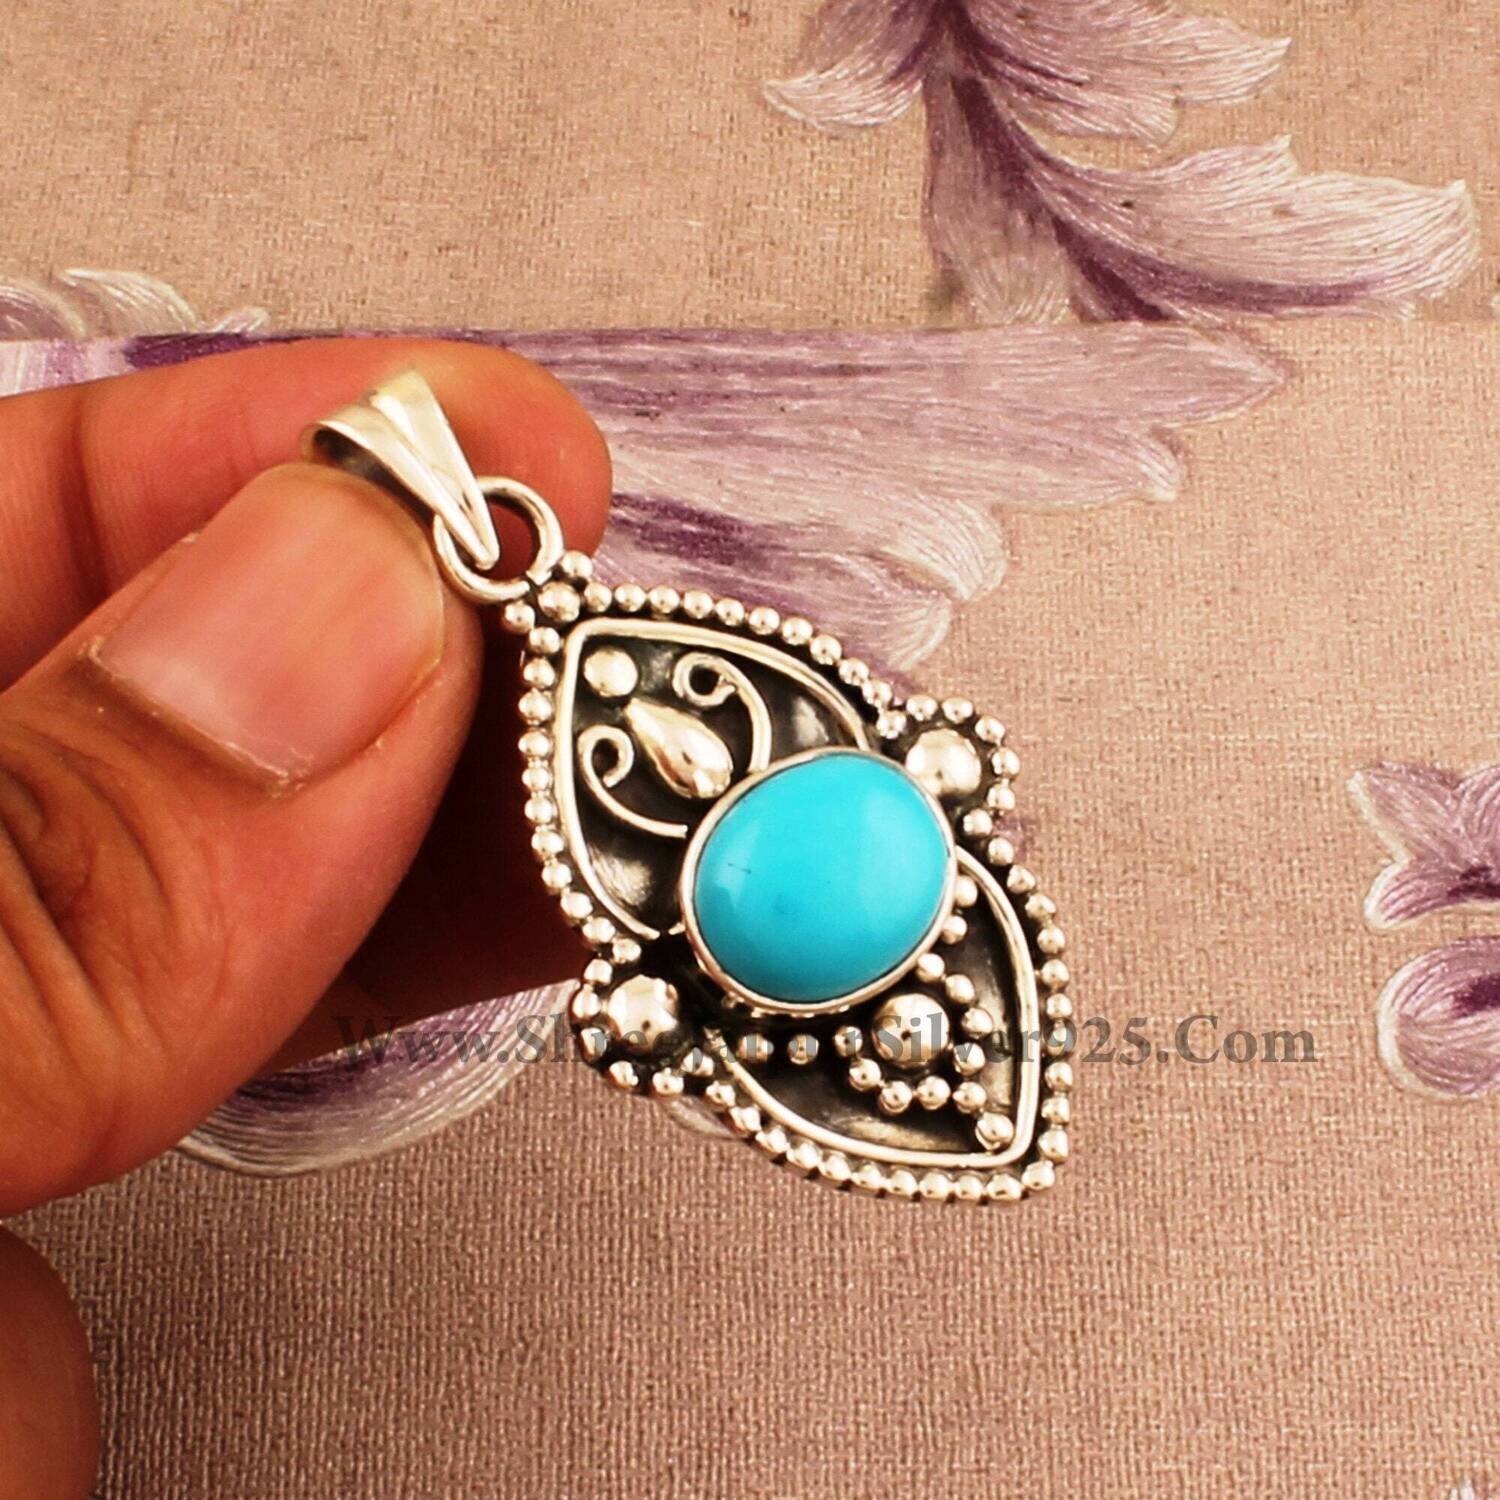 Turquoise 925 Sterling Silver Necklace Pendant For Women, Turquoise Oval Stone Wedding Pendant, Solid Silver Engraved Pendant For Gift Idea